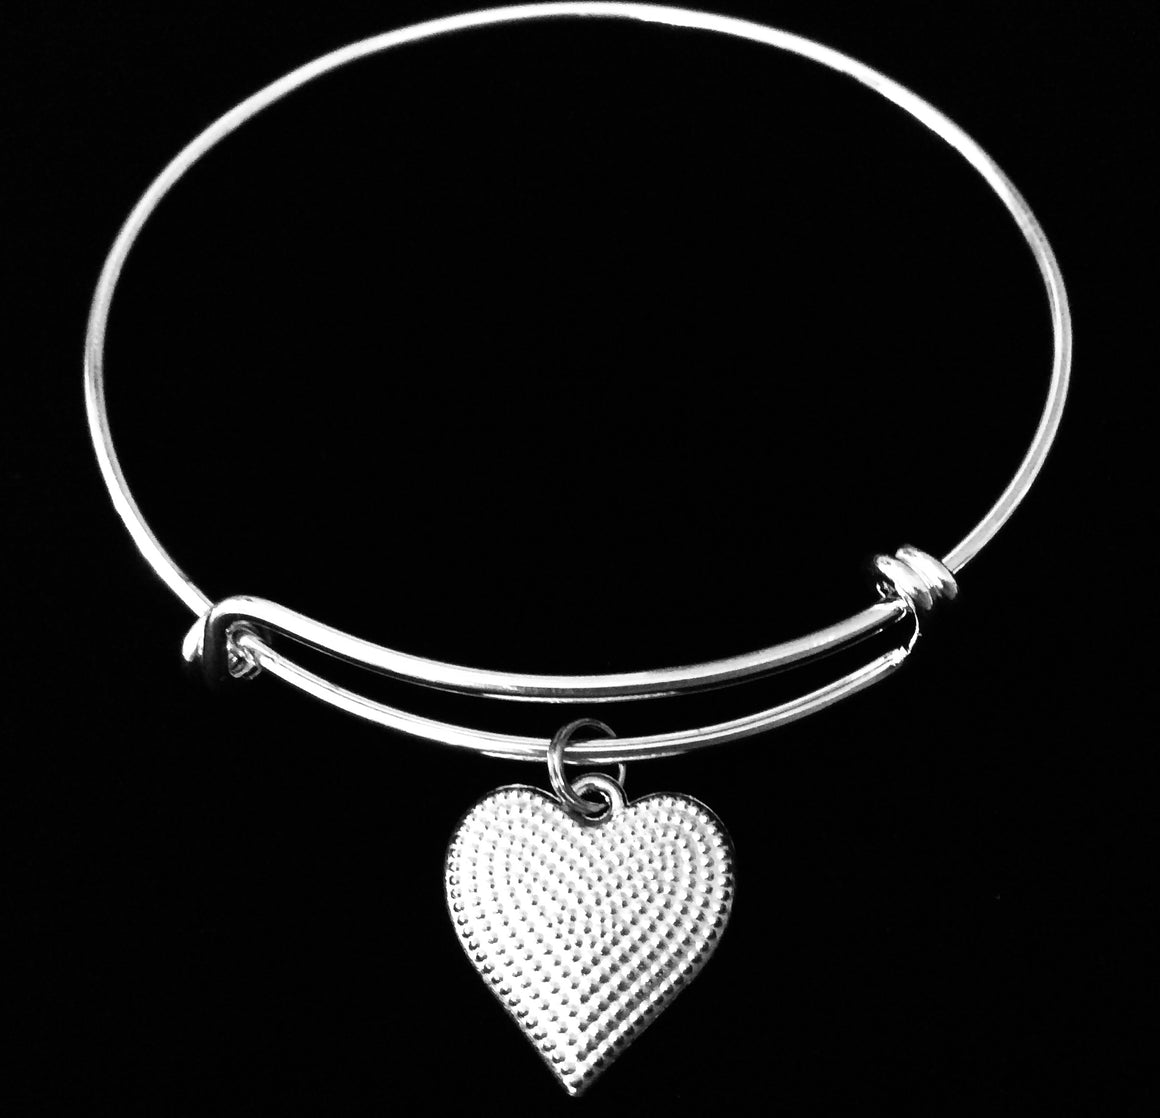 Silver Heart Expandable Charm Bracelet Adjustable Wire Bangle One Size Fits All Gift